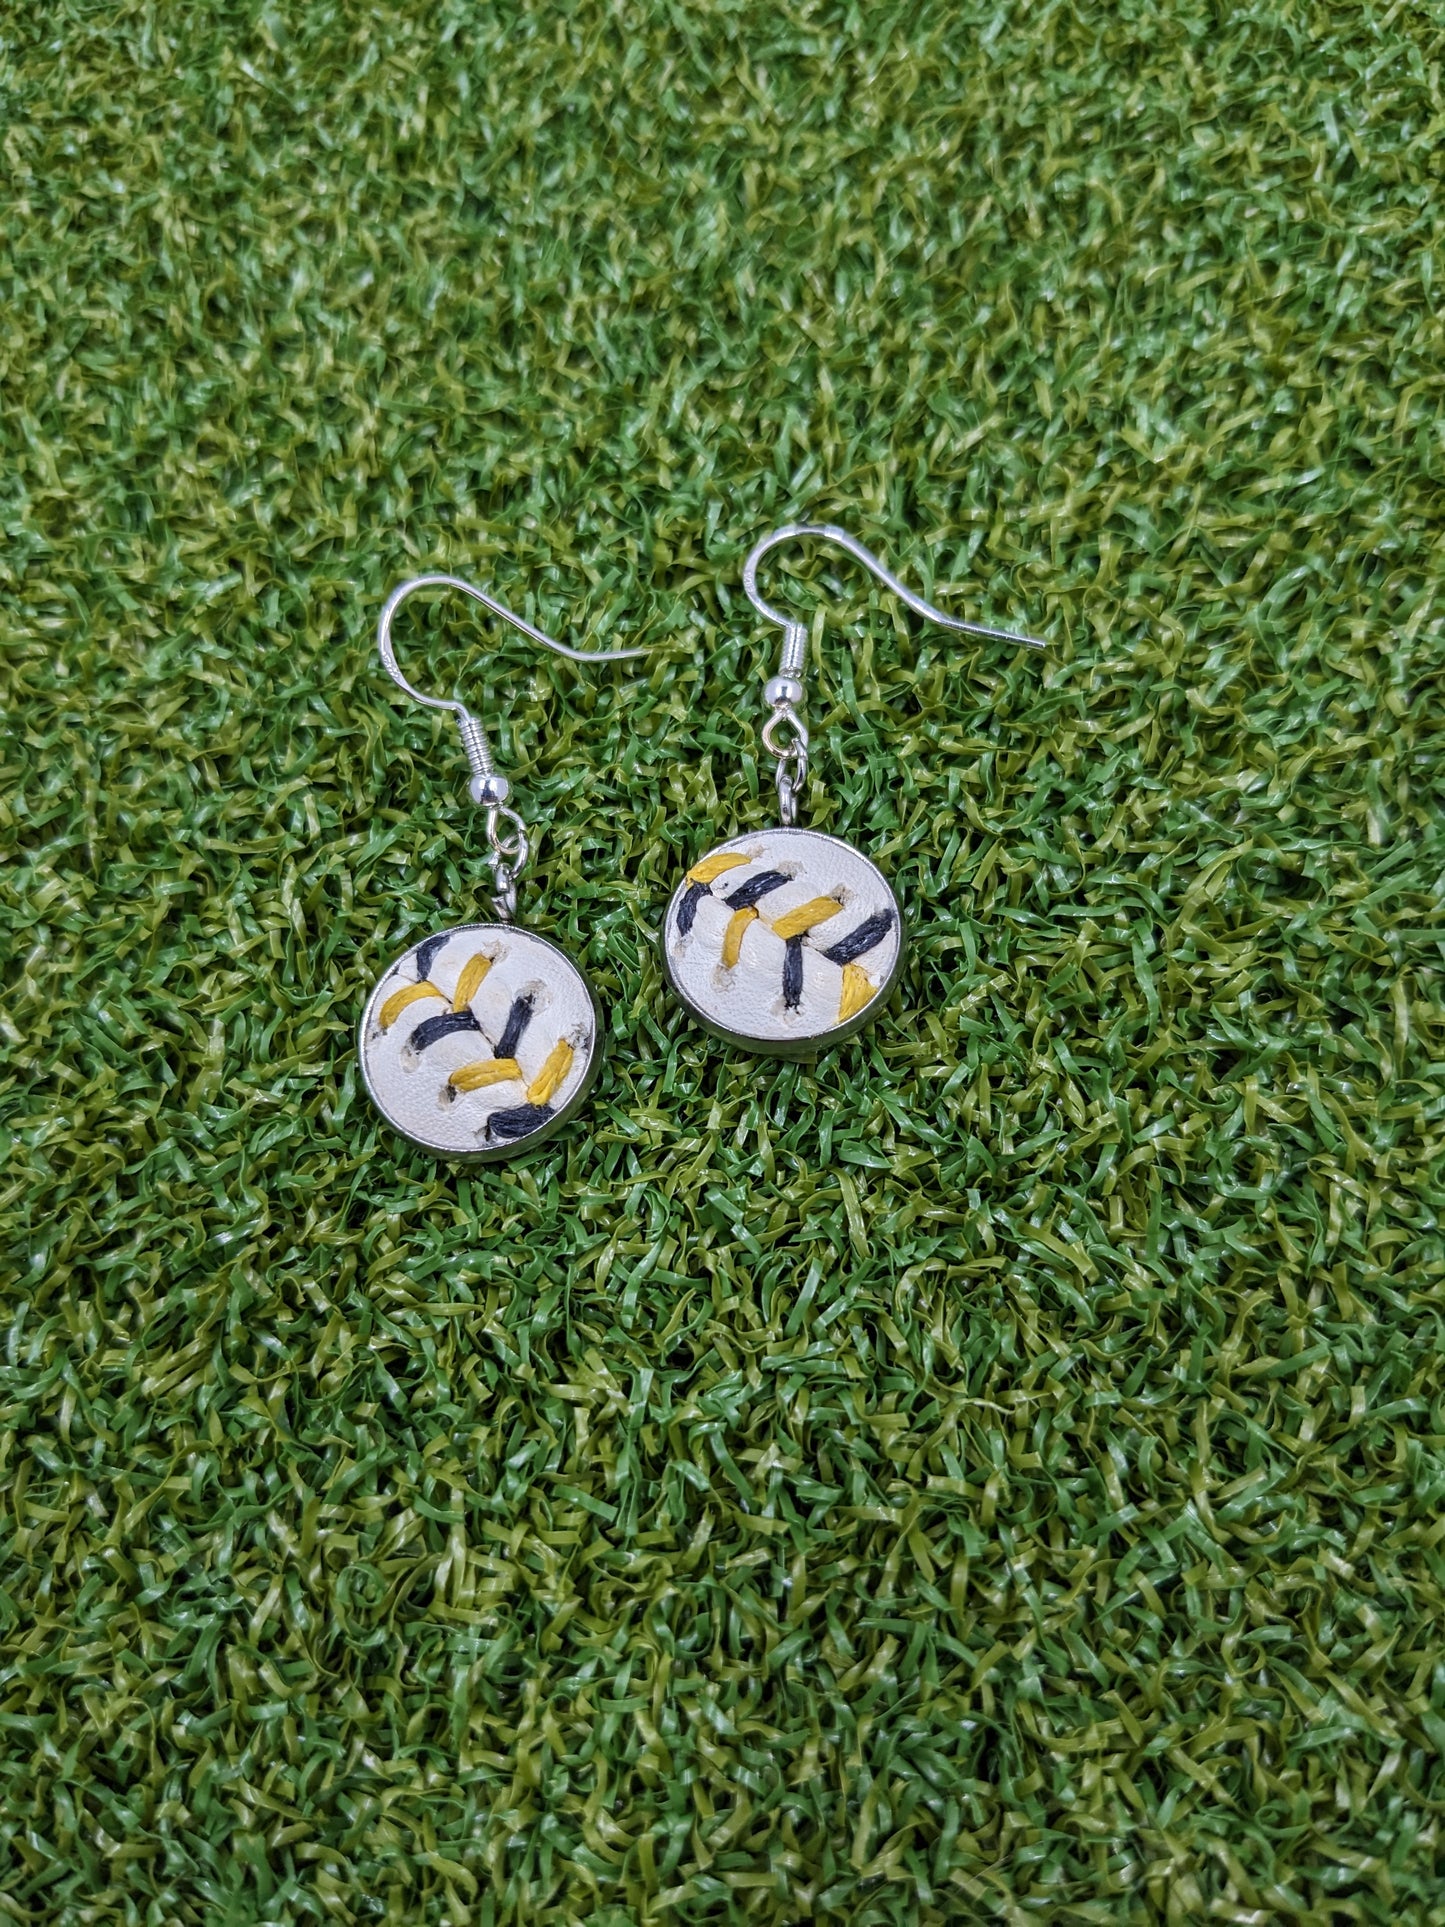 Black & Yellow Stitches - Baseball Small Dangle Earrings - Limited Edition